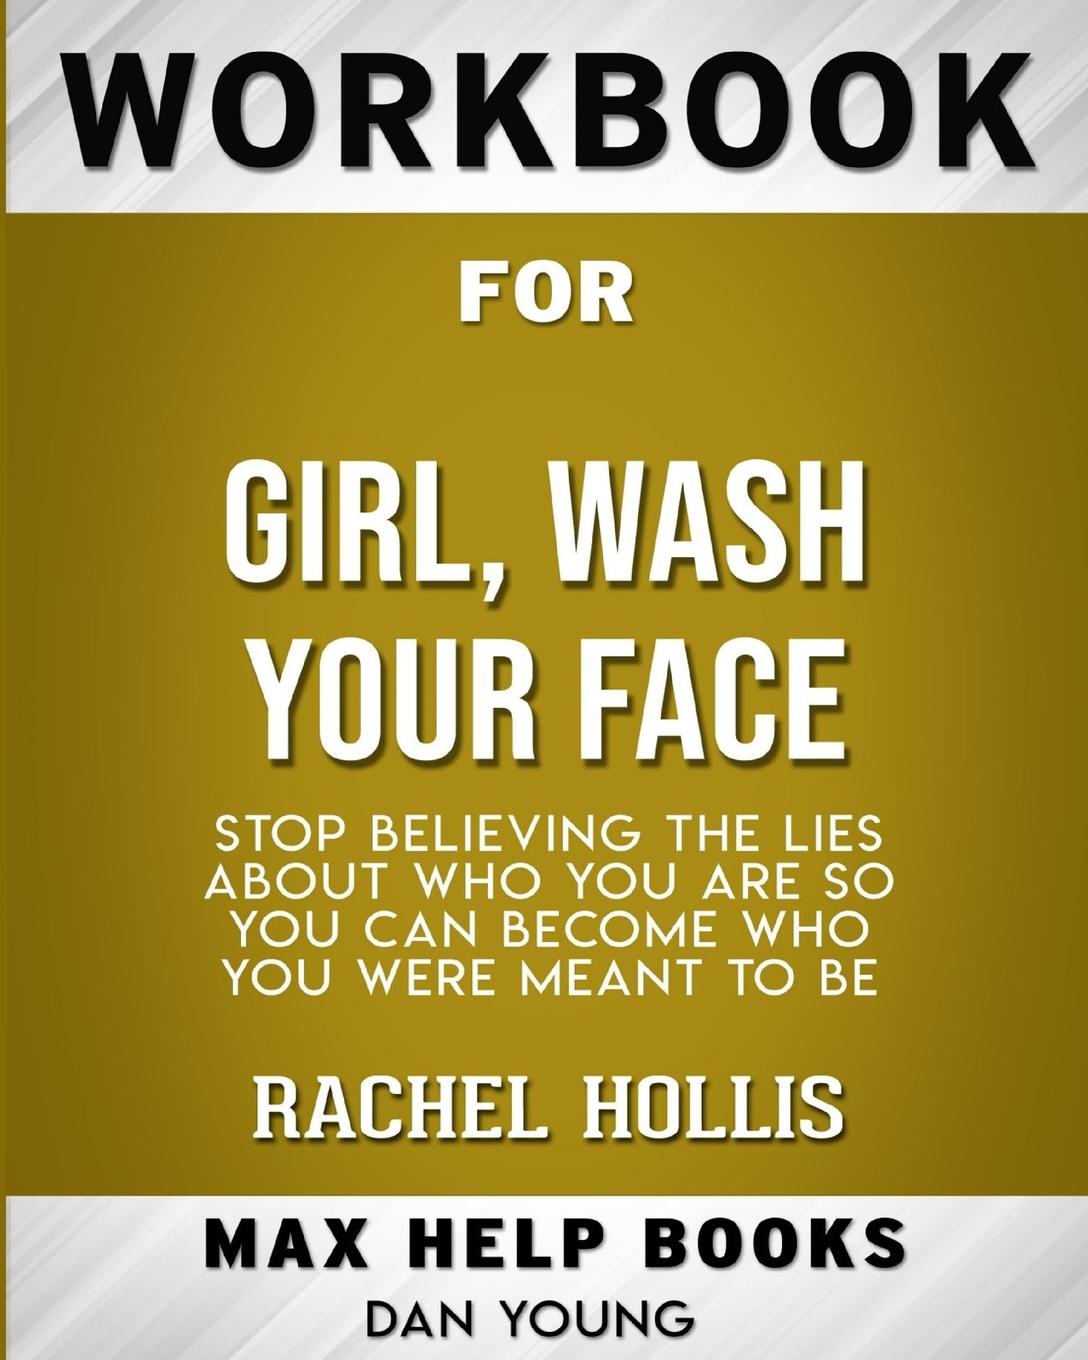 Workbook for Girl, Wash Your Face. Stop Believing the Lies About Who You Are so You Can Become Who You Were Meant to Be